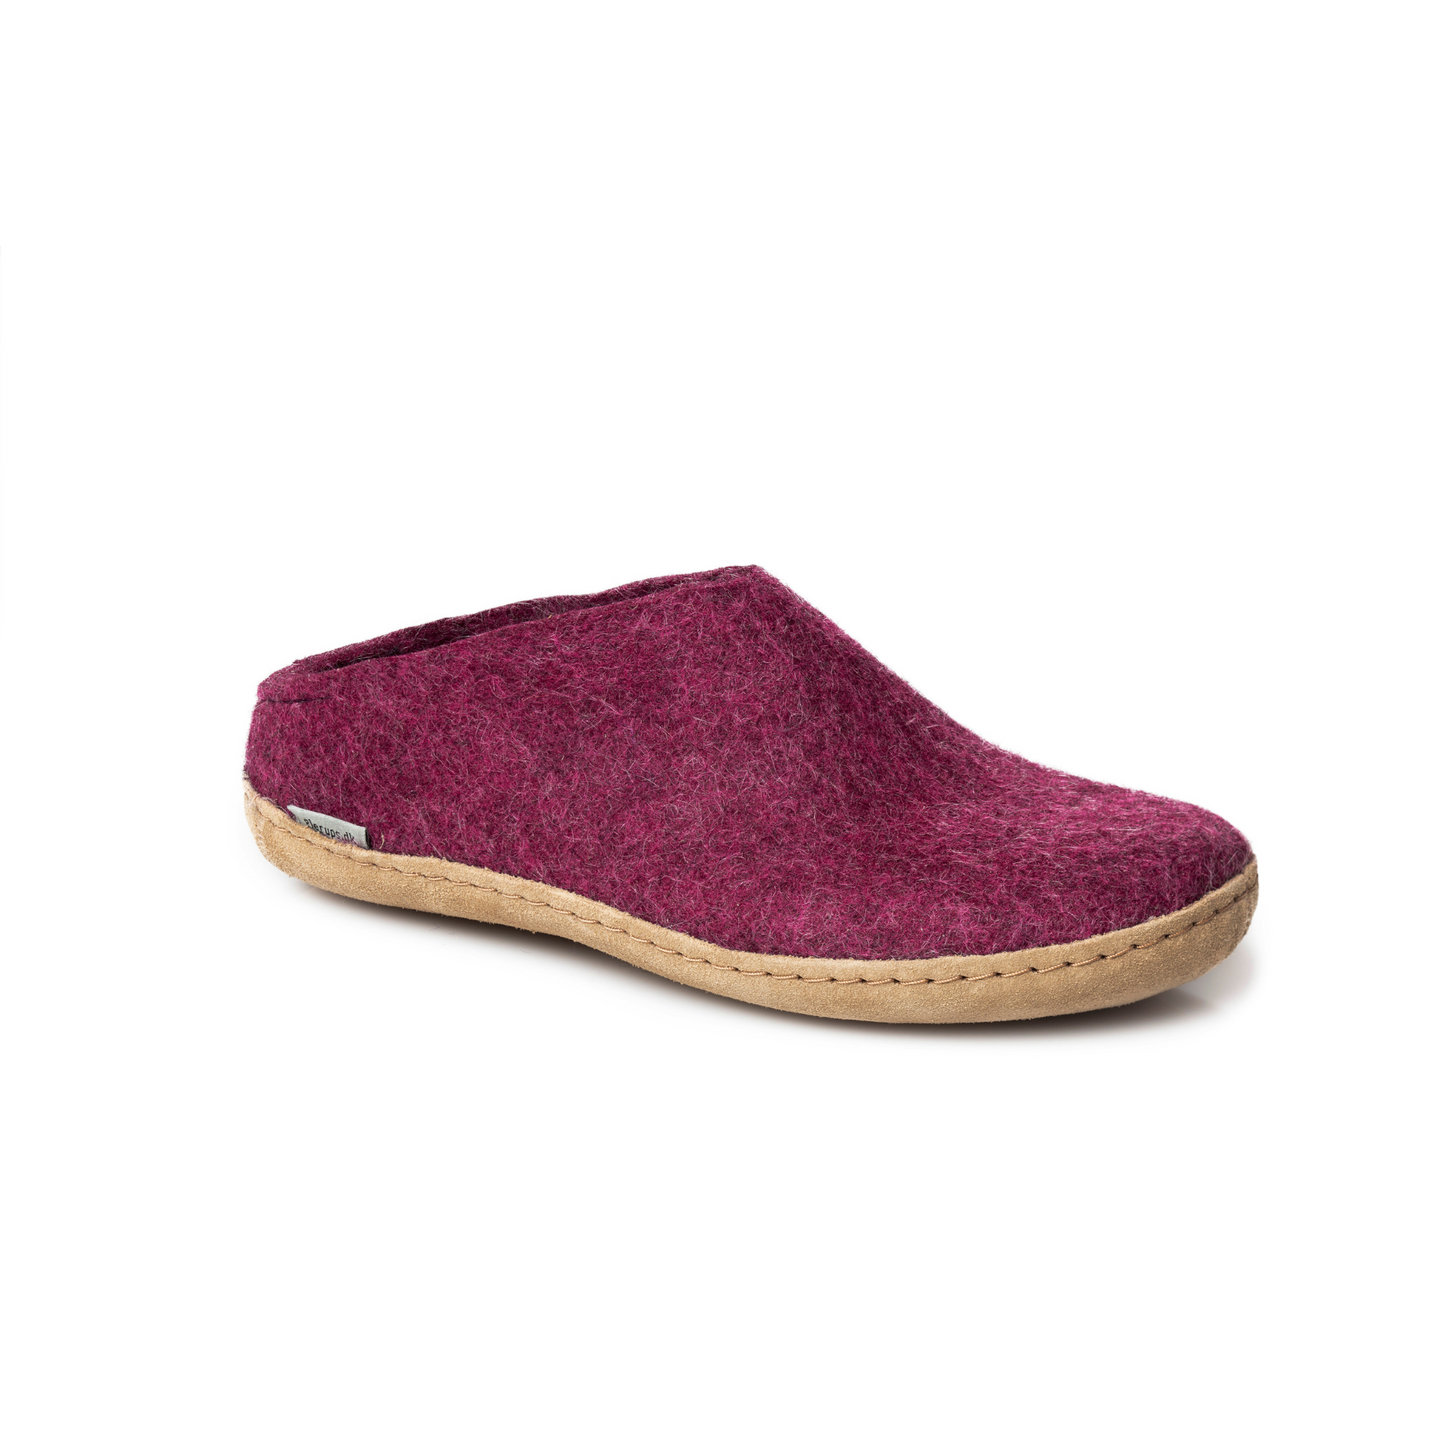 A felted deep-mauve slipper pictured at a slight angle, showing part of the top front and side of the slipper. A tan leather sole lines the bottom of the shoe with a row of stitching.